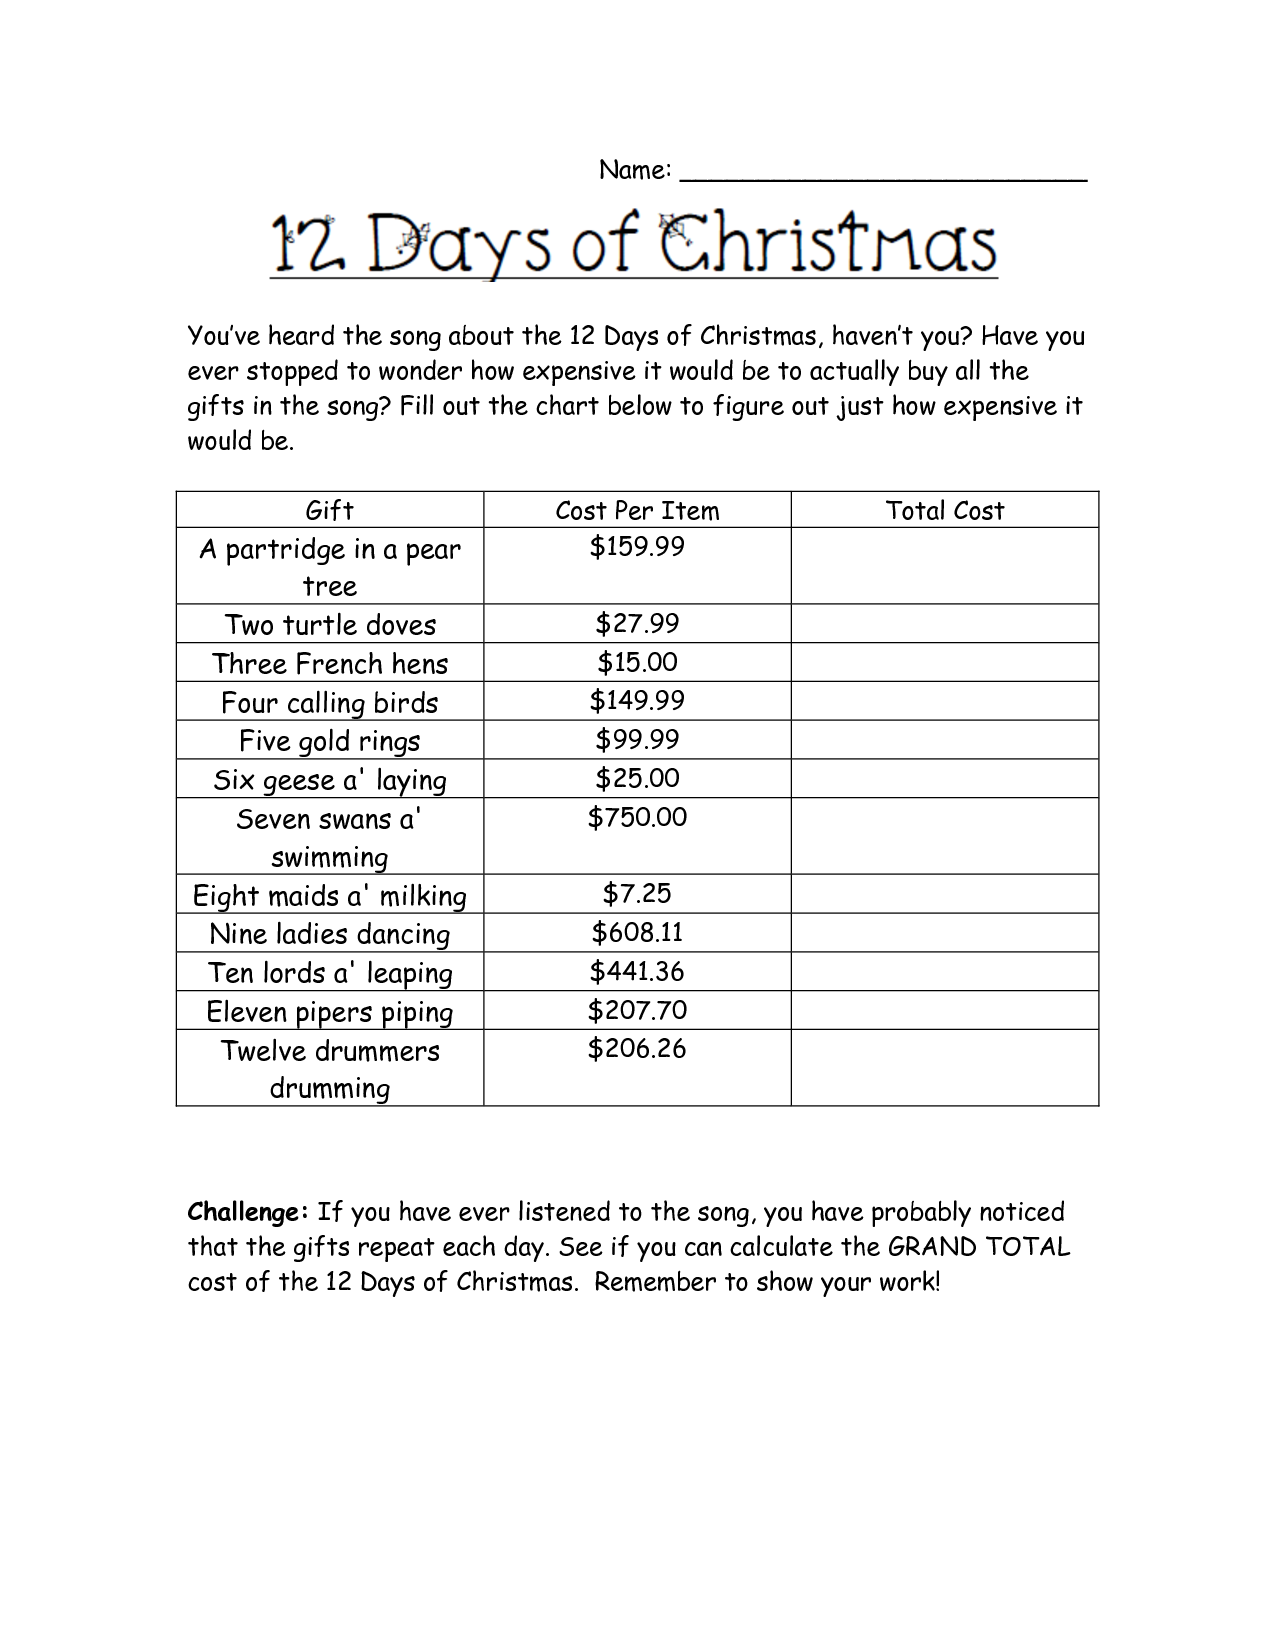 12 Days Of Christmas Worksheet Answers